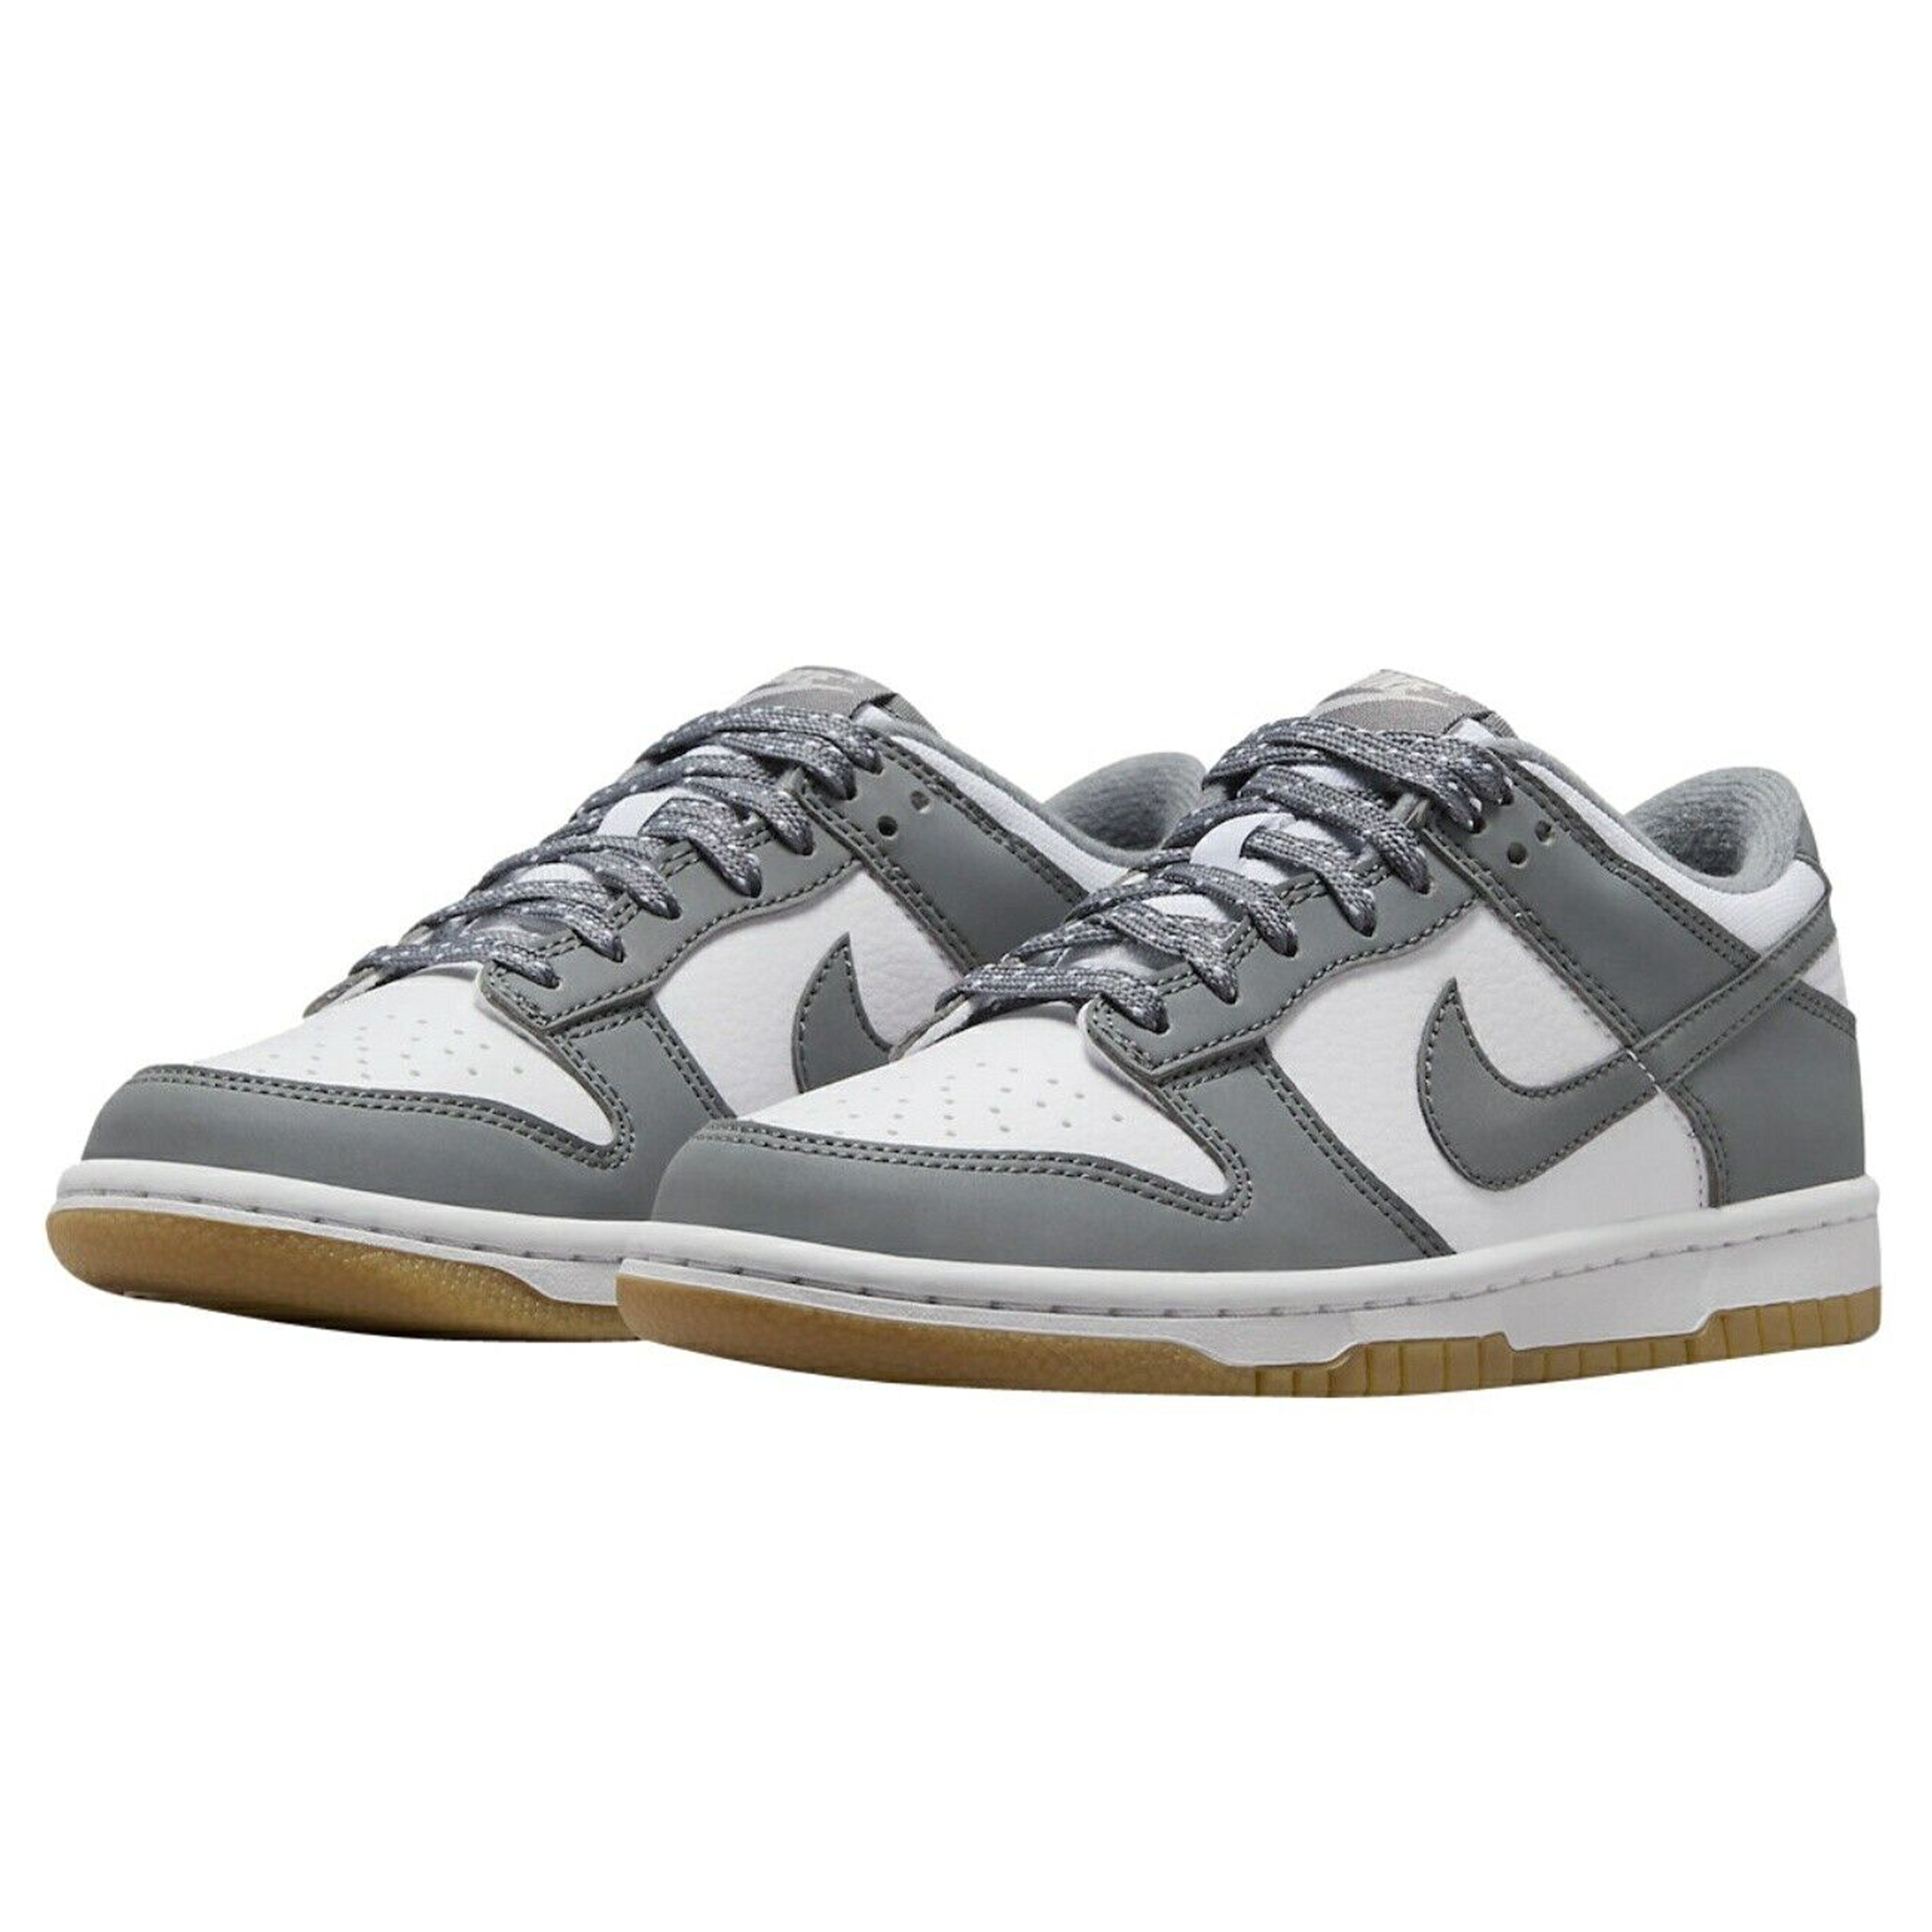 Nike Dunk Low (GS) - "Reflective Grey"